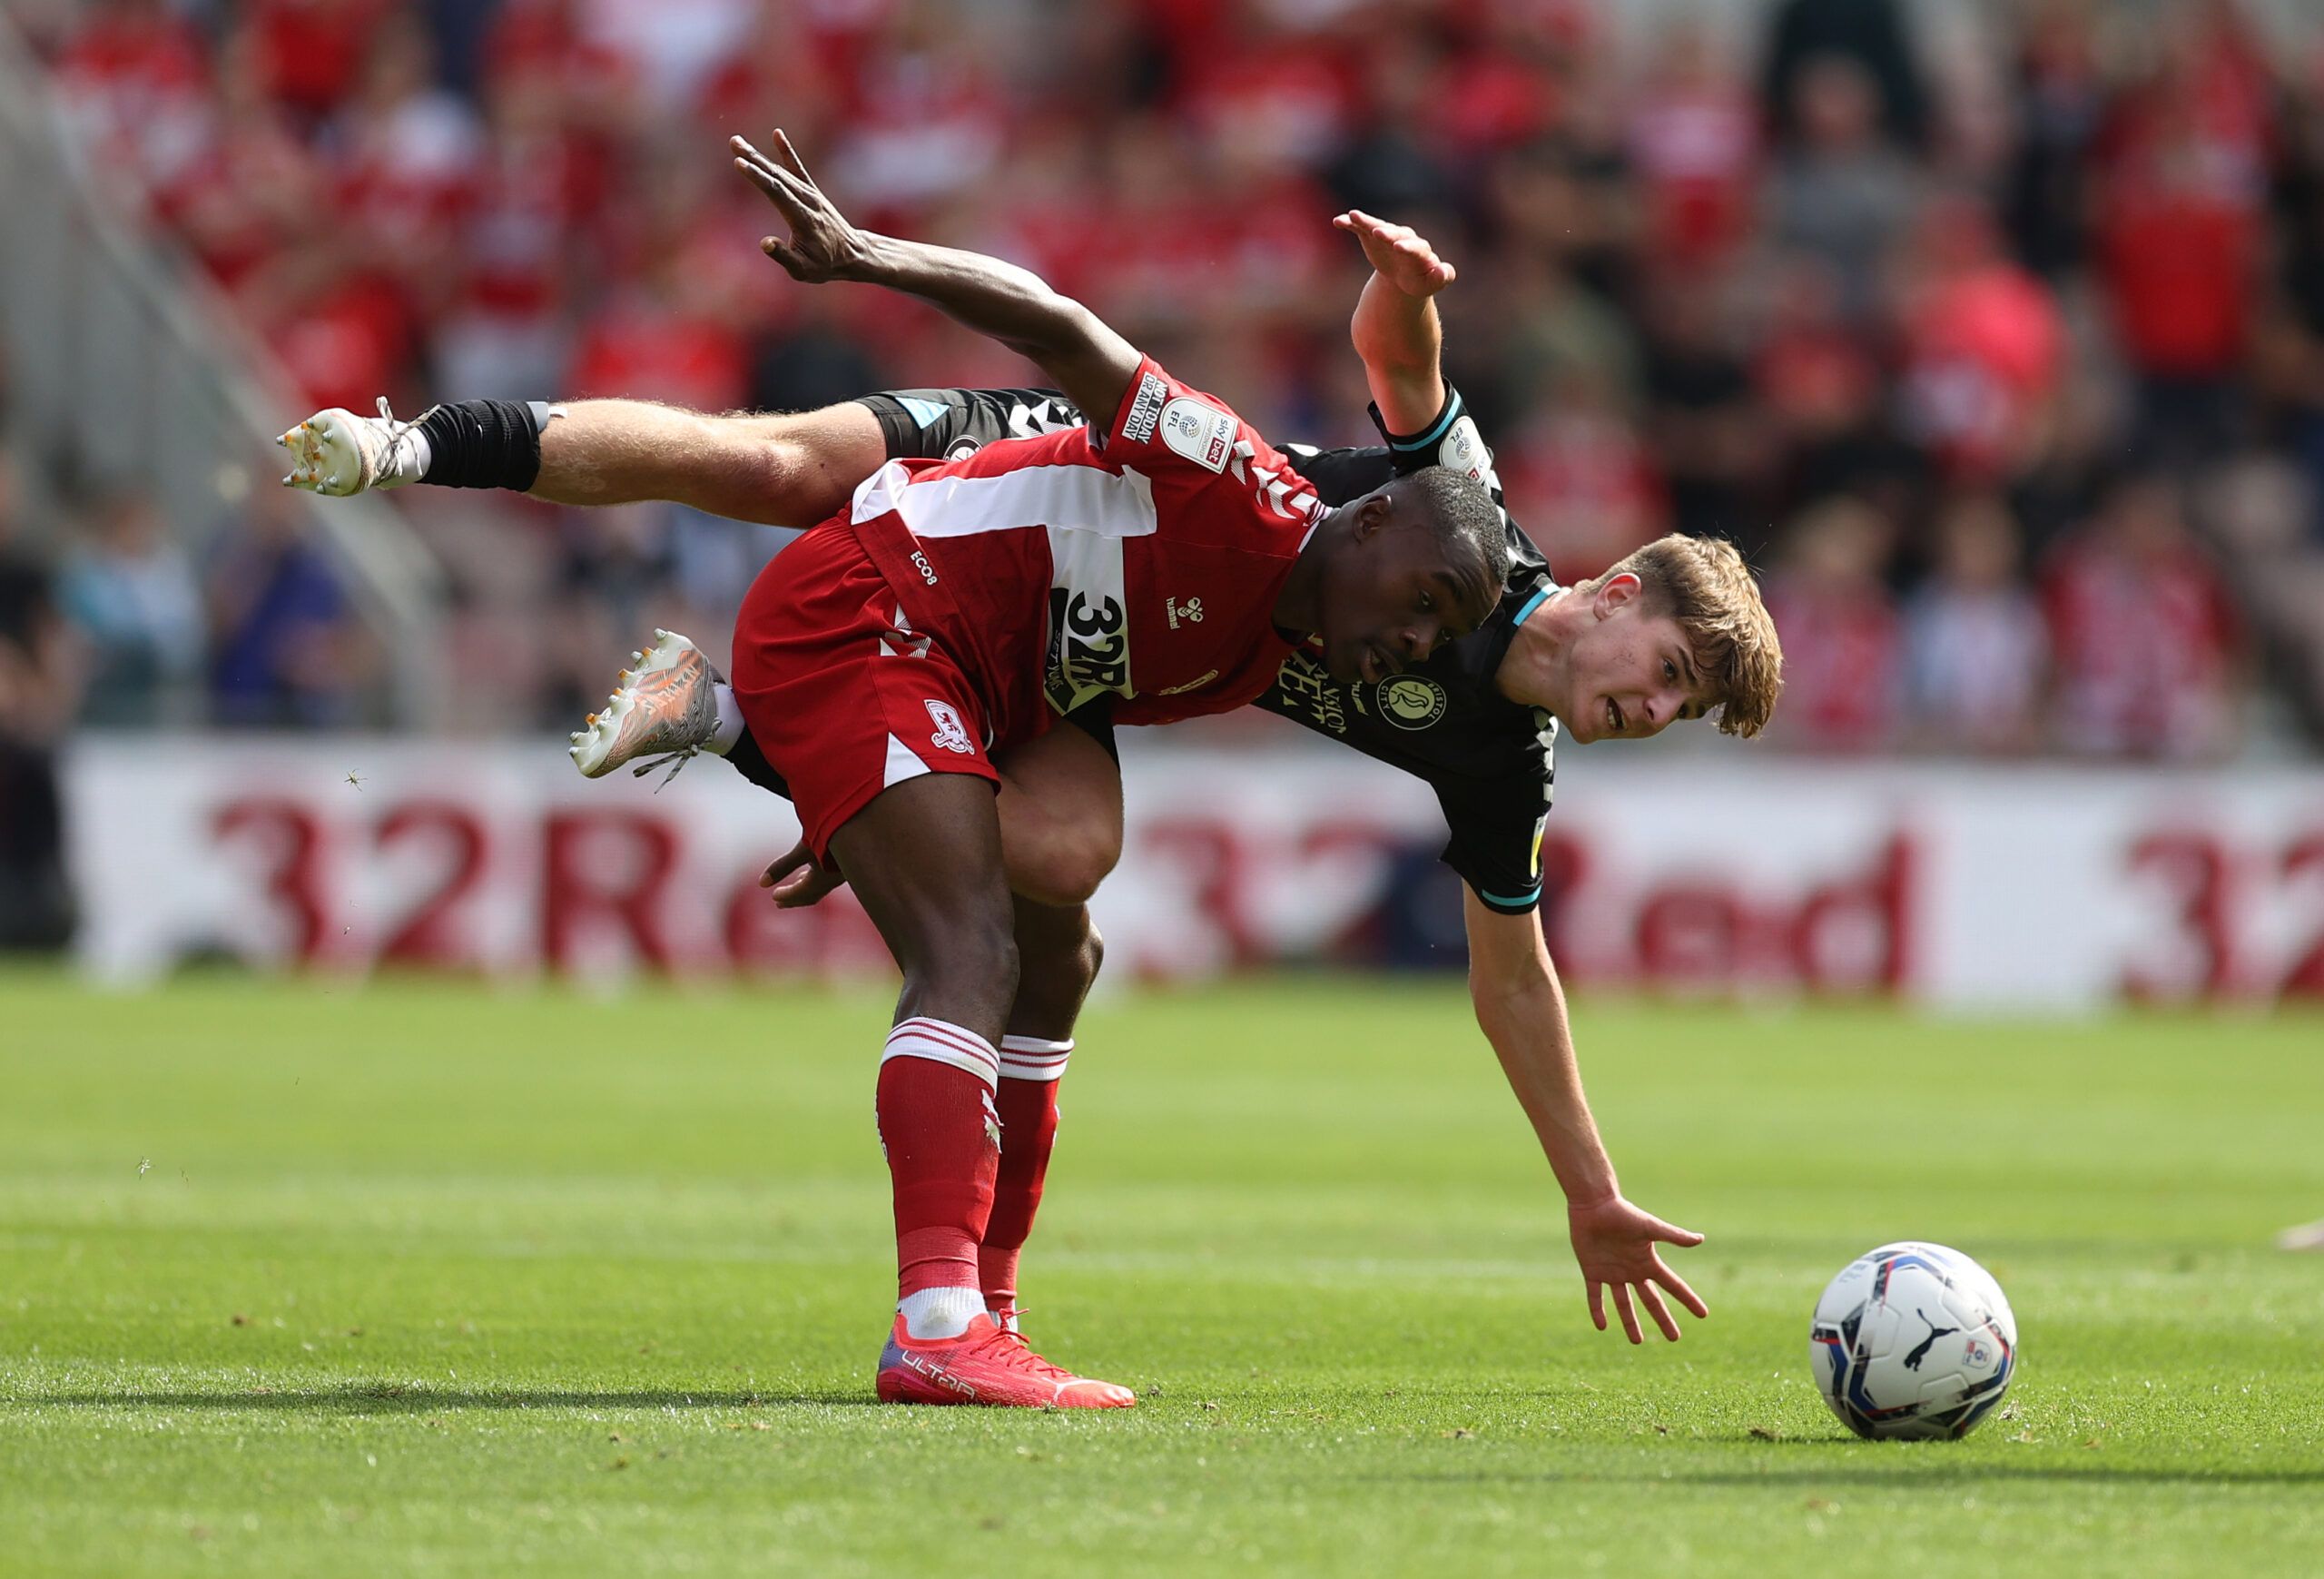 Soccer Football - Championship - Middlesbrough v Bristol City - Riverside Stadium, Middlesbrough, Britain - August 14, 2021 Middlesbrough's Marc Bola in action with Bristol City's Alex Scott Action Images/Lee Smith EDITORIAL USE ONLY. No use with unauthorized audio, video, data, fixture lists, club/league logos or 'live' services. Online in-match use limited to 75 images, no video emulation. No use in betting, games or single club /league/player publications.  Please contact your account represe